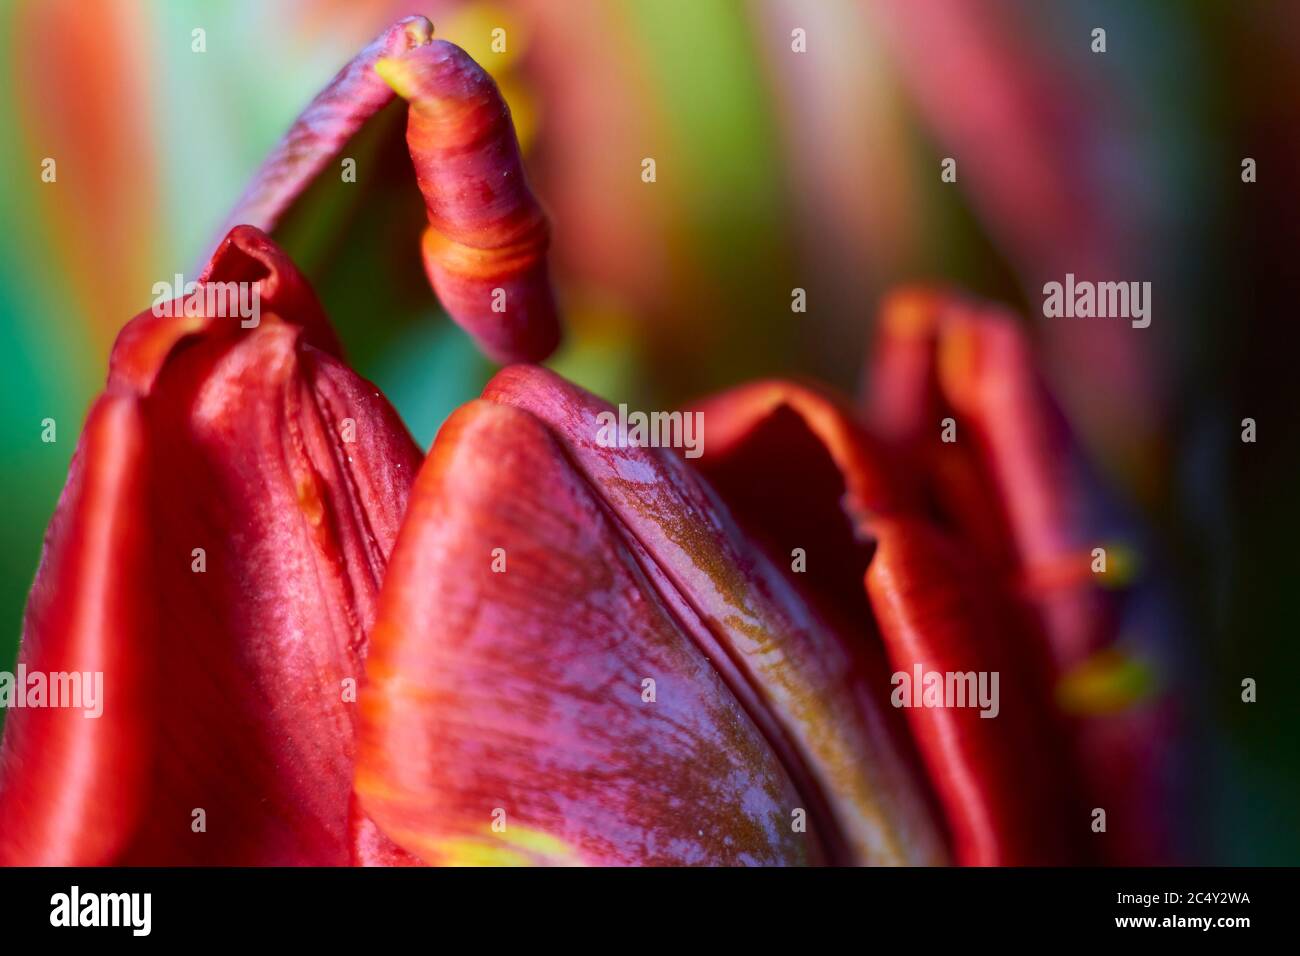 Macroshot of red tulip buds as natural and holidays background extreme closeup. Beautiful tulips flower for postcard beauty and design. Stock Photo